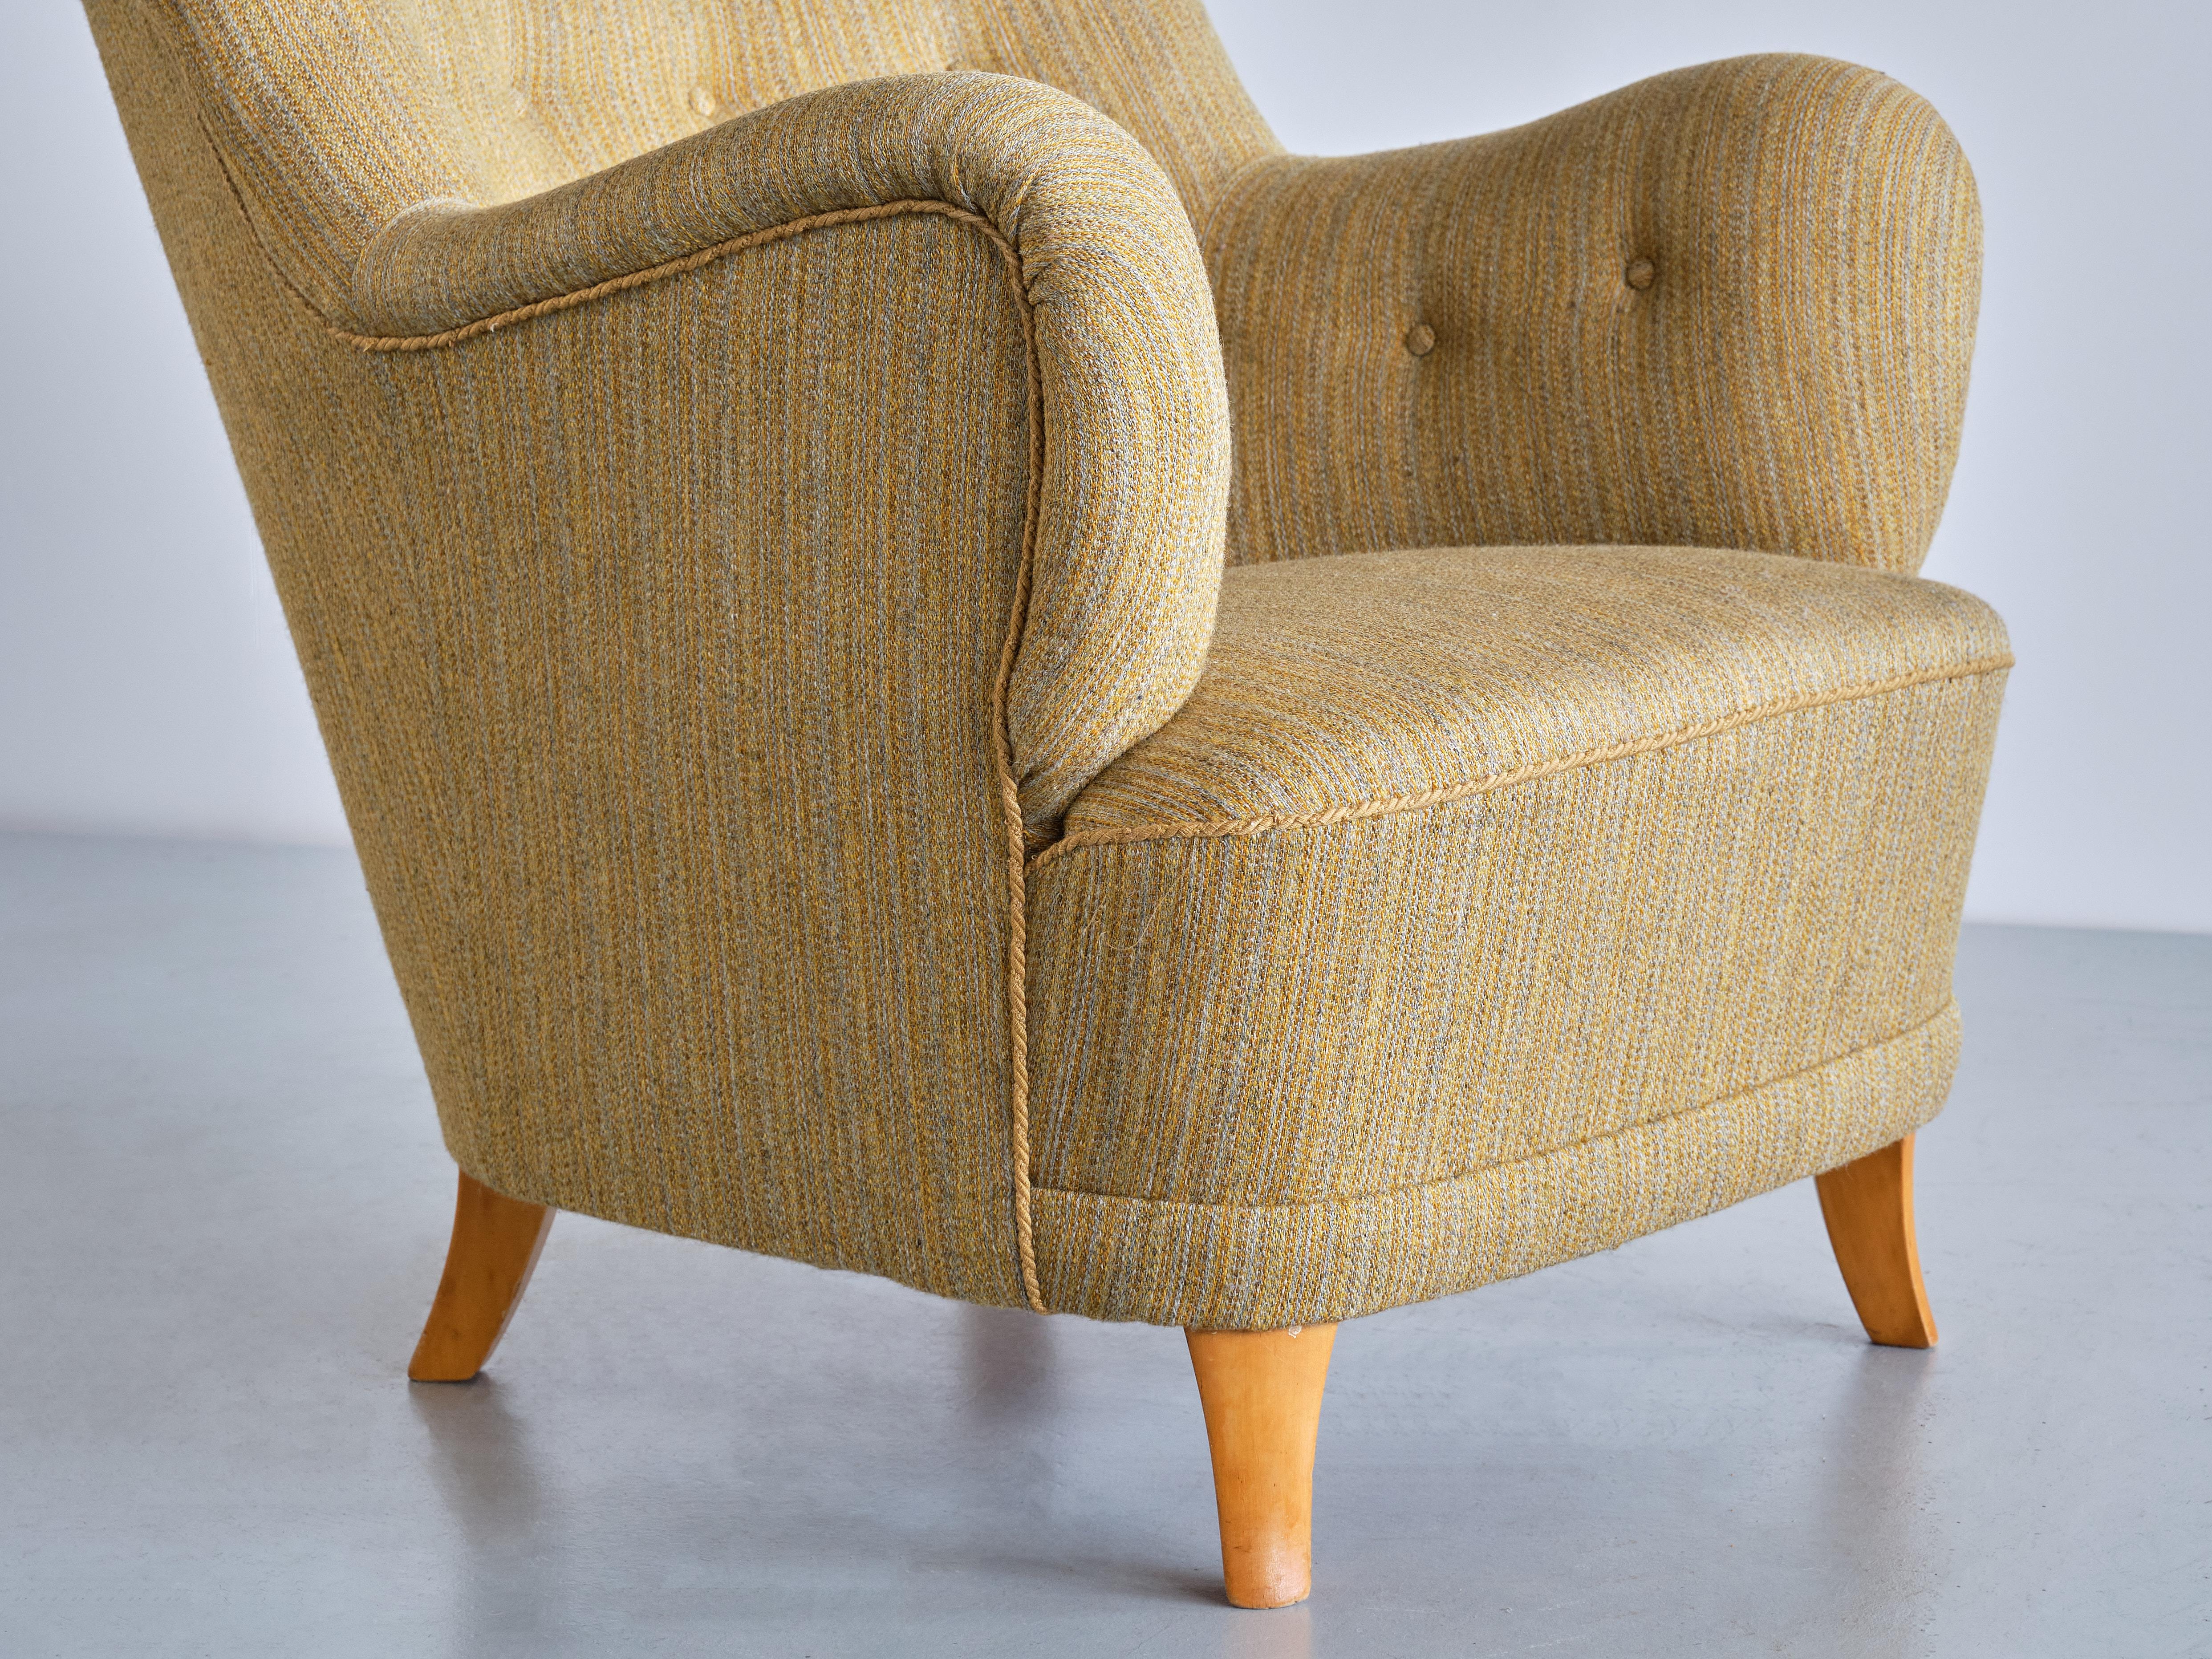 Sculptural Pair of Gustav Axel Berg Armchairs in Beech and Wool, Sweden, 1940s For Sale 6